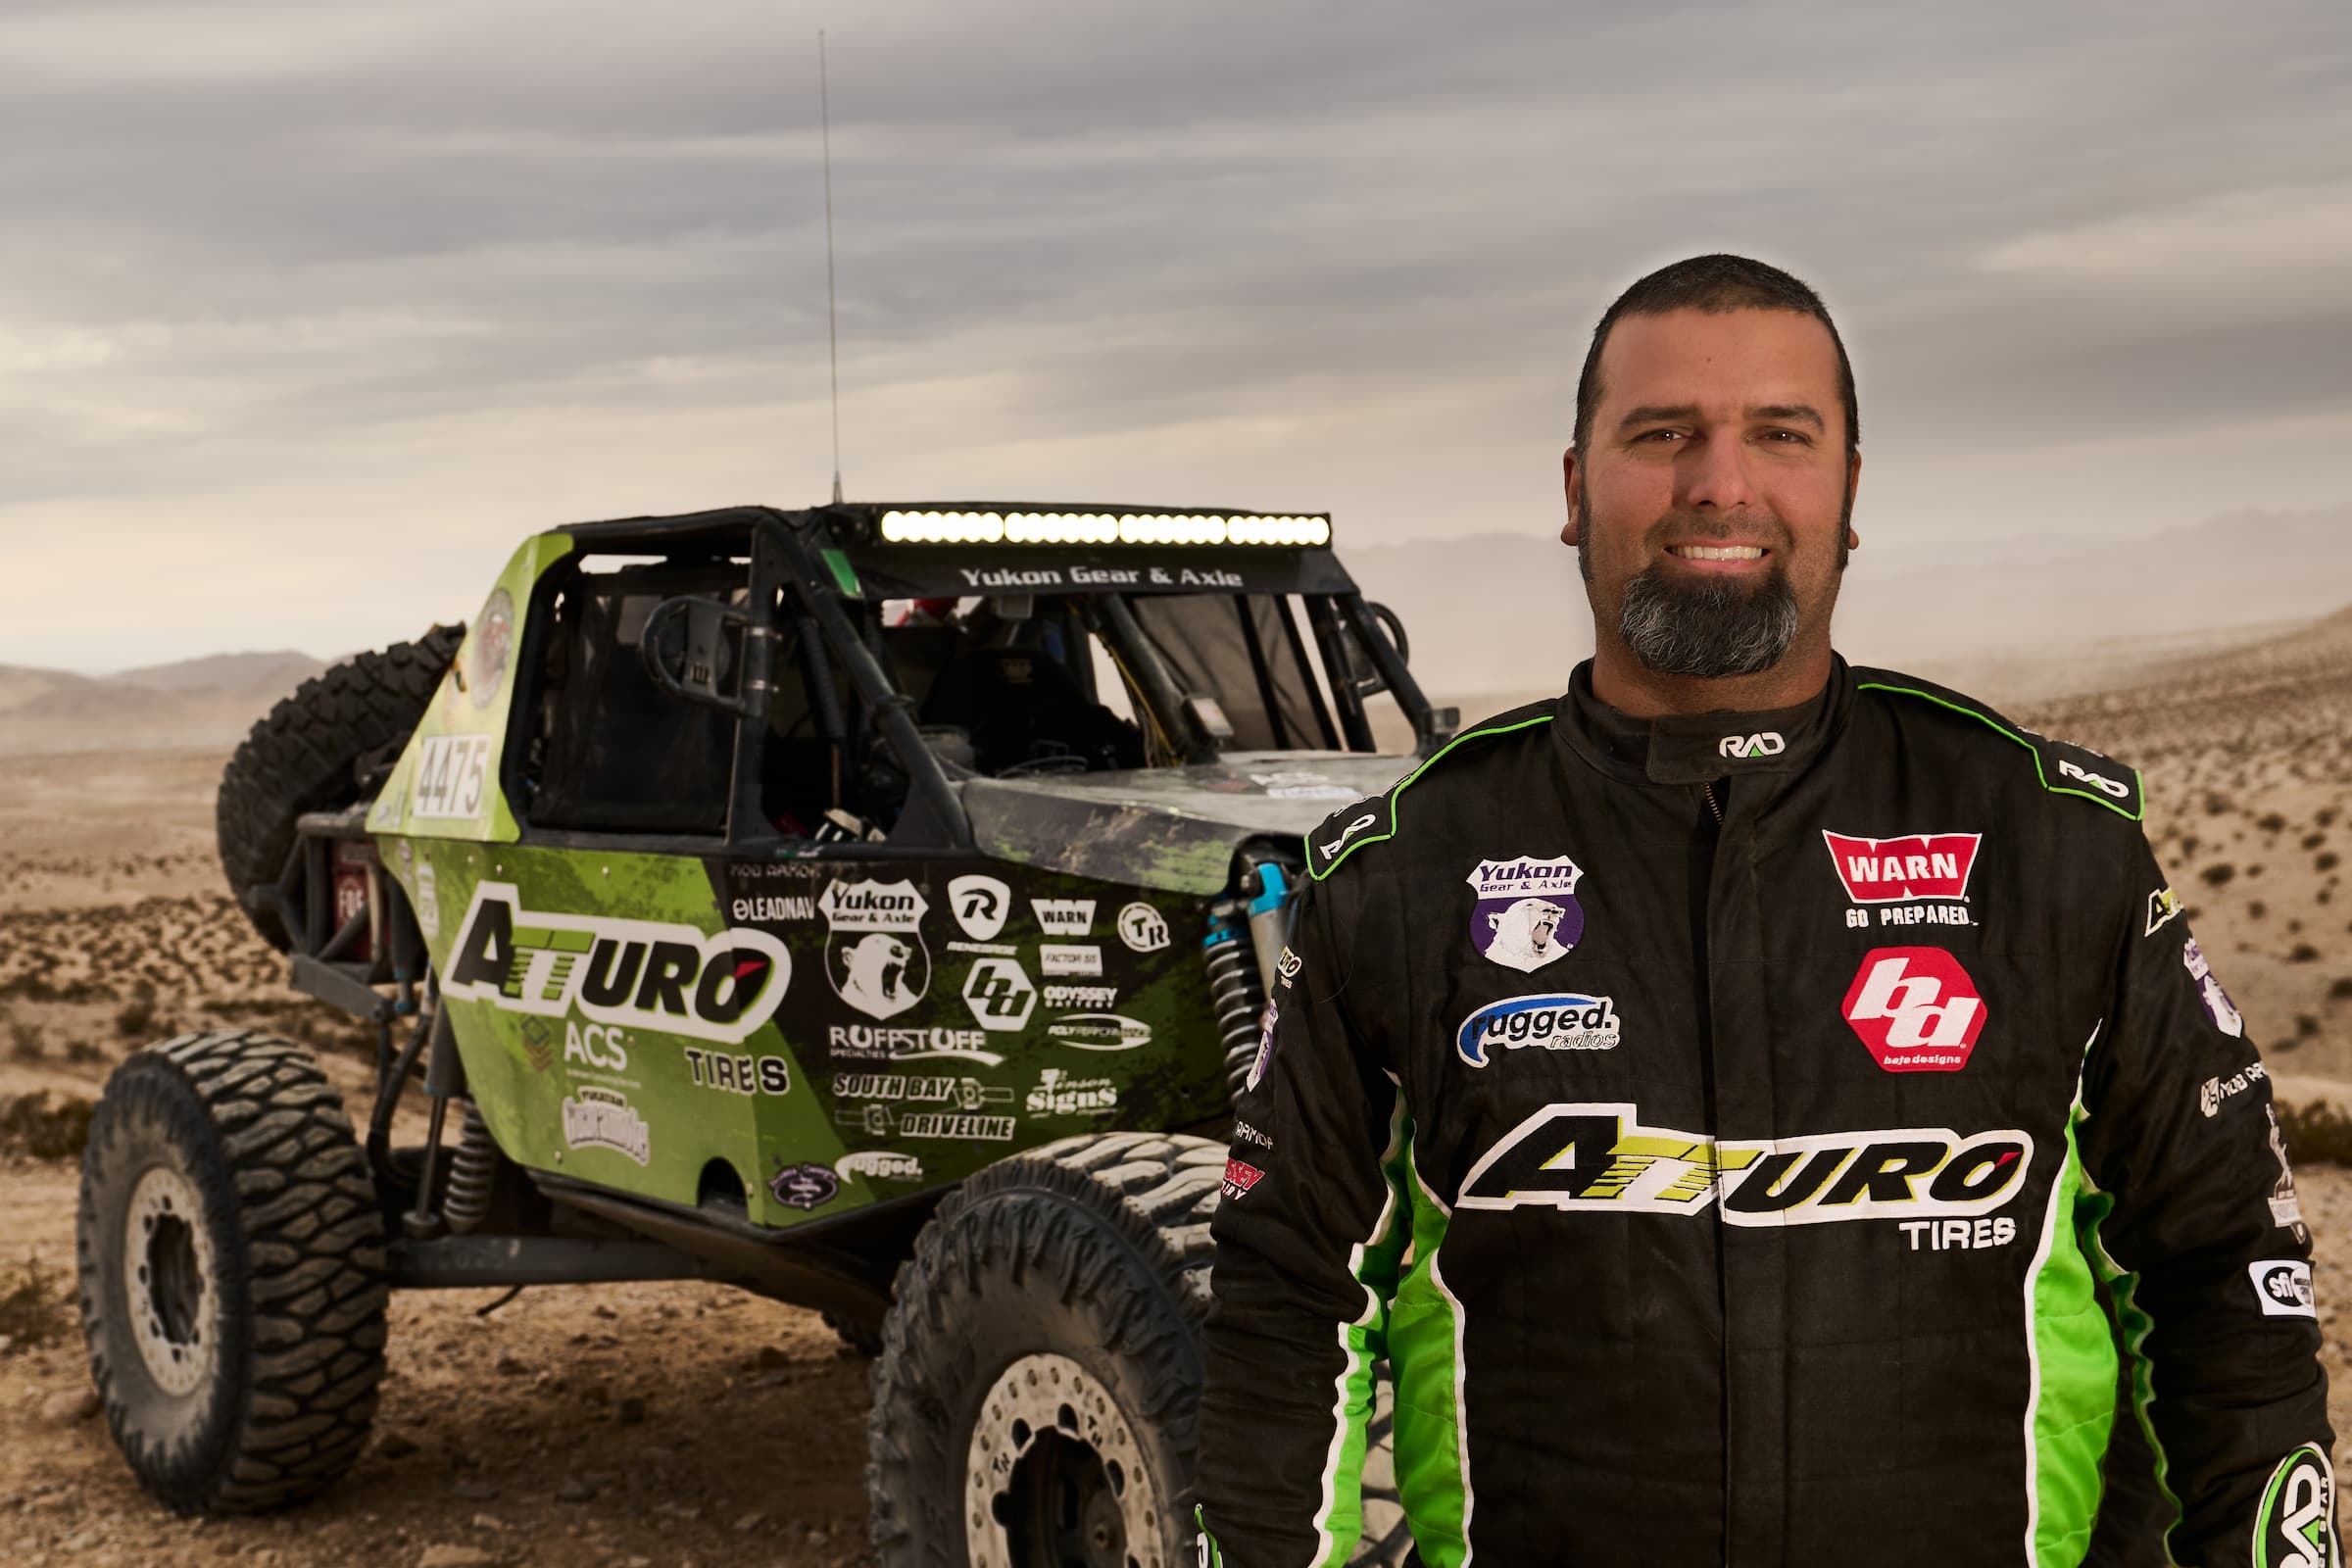 ATTURO TIRE PUTS NEW COMPOUND TO THE TEST AT ‘KING OF THE HAMMERS’ OFF-ROAD ENDURANCE RACE